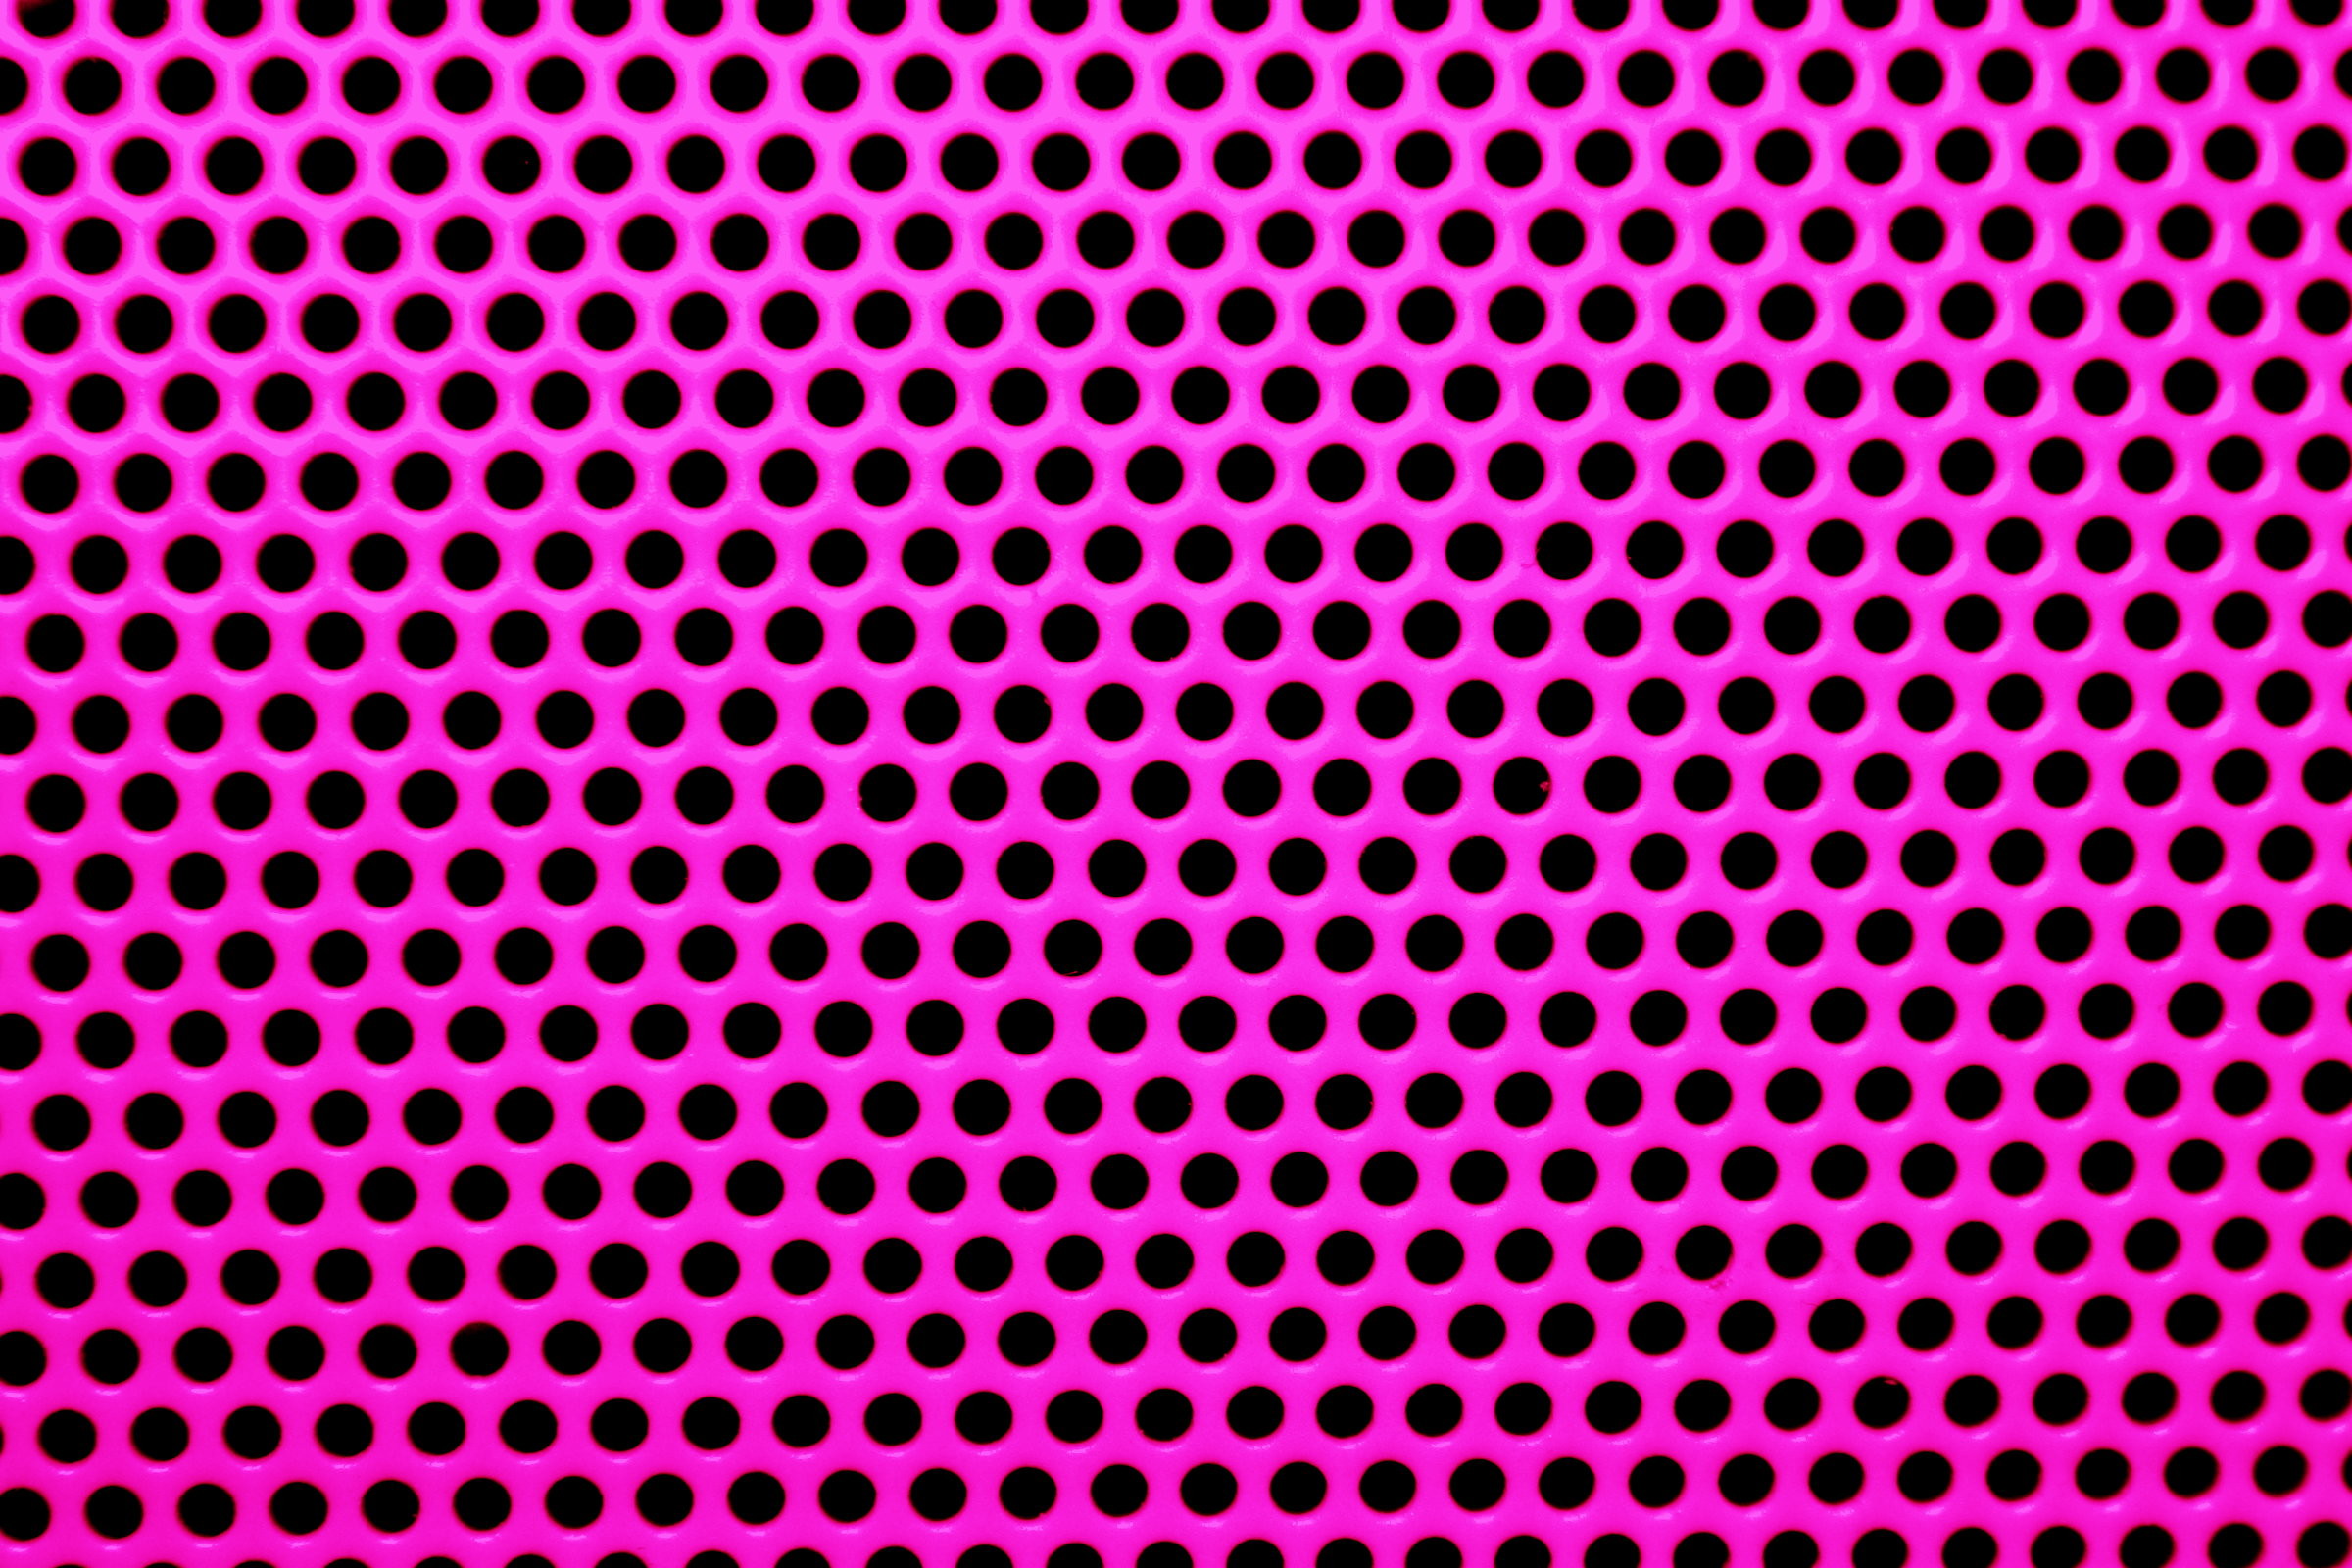 2400x1600 Fuchsia Hot Pink Metal Mesh with Round Holes Texture